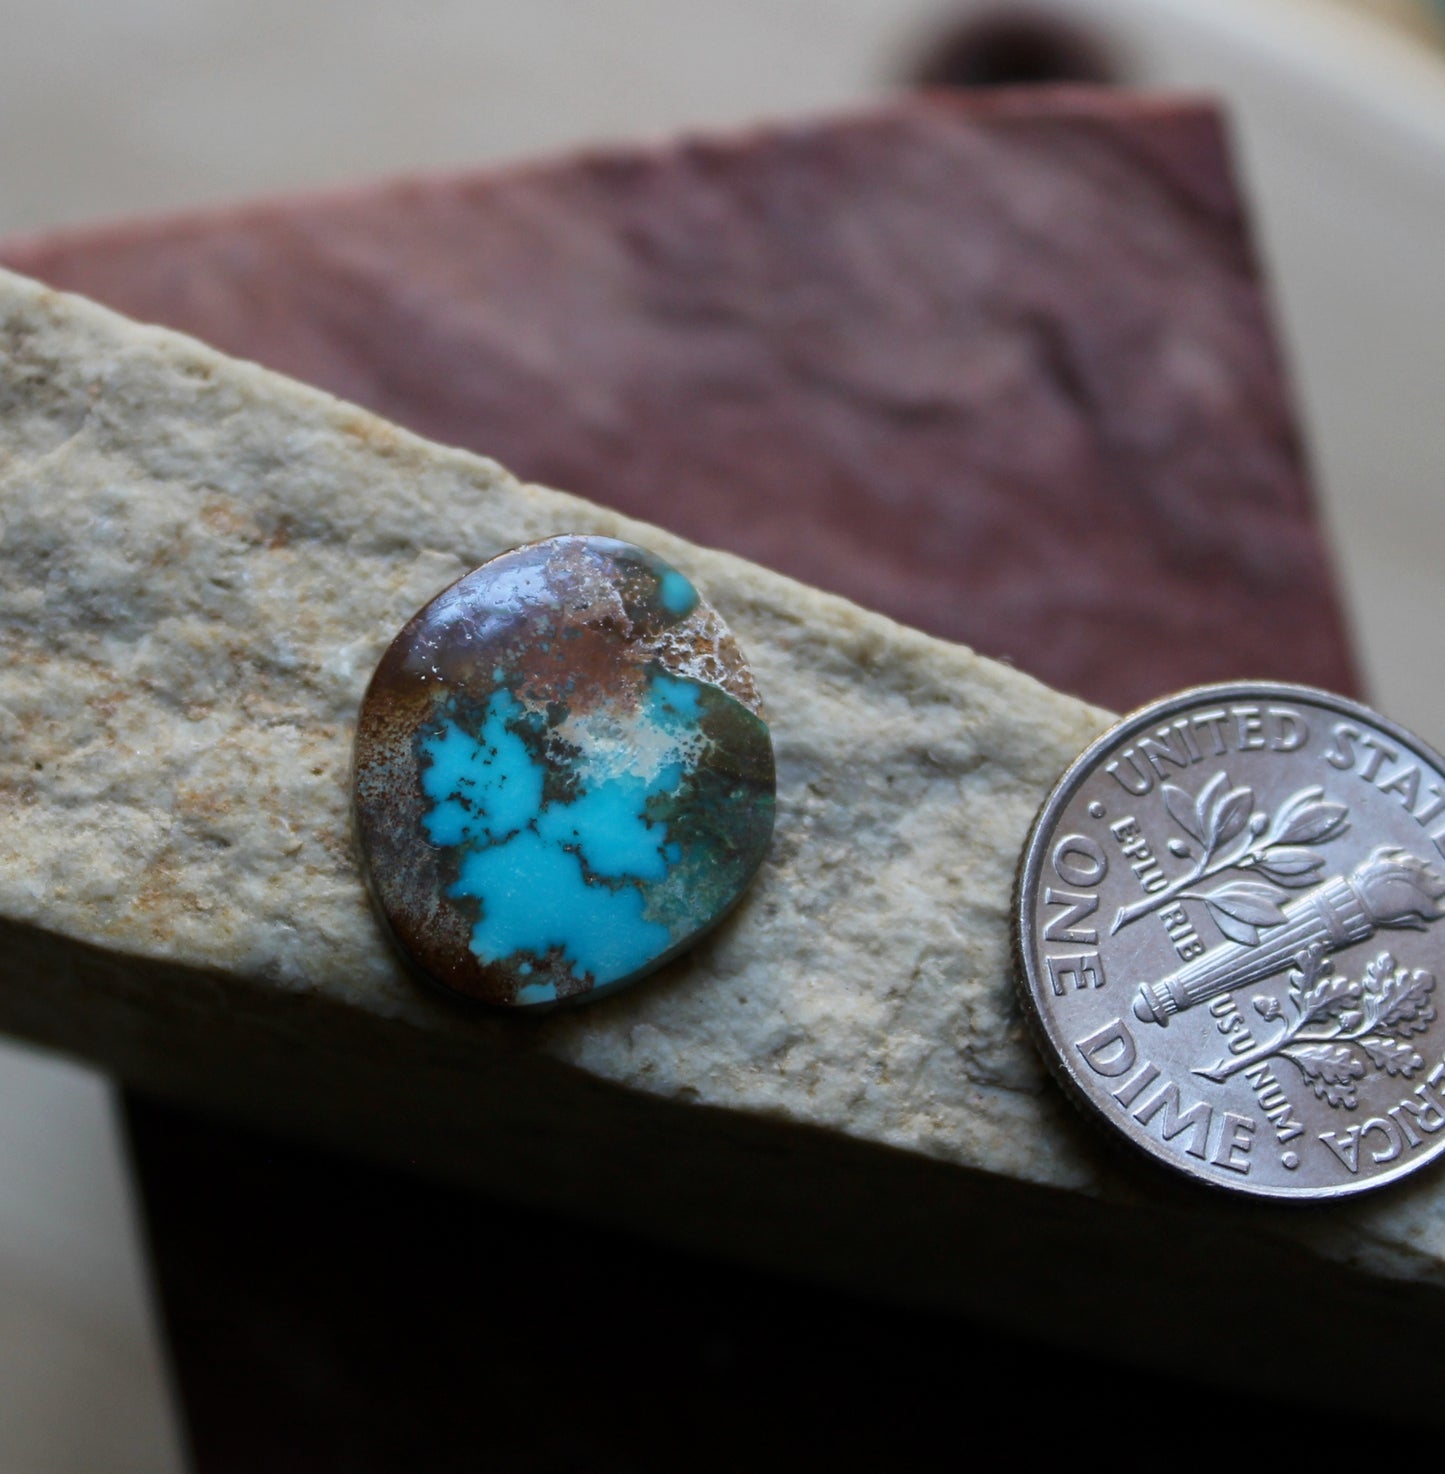 4 carat blue Stone Mountain Turquoise cabochon with red inclusions